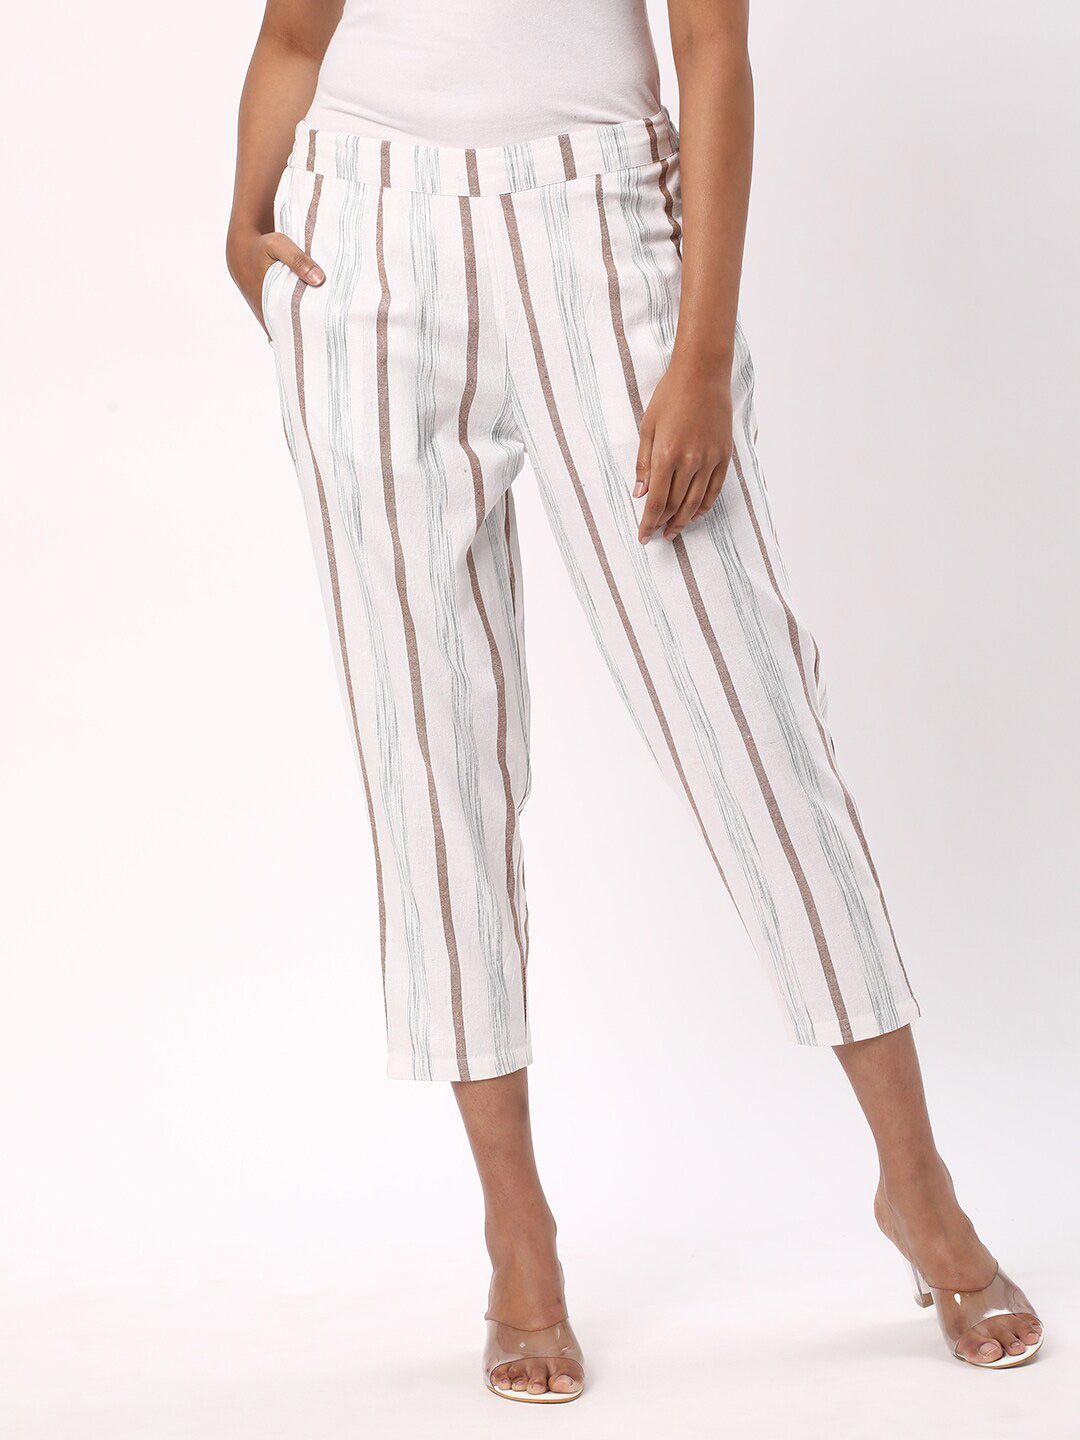 R&B Women Striped Cotton Culottes Trousers Price in India